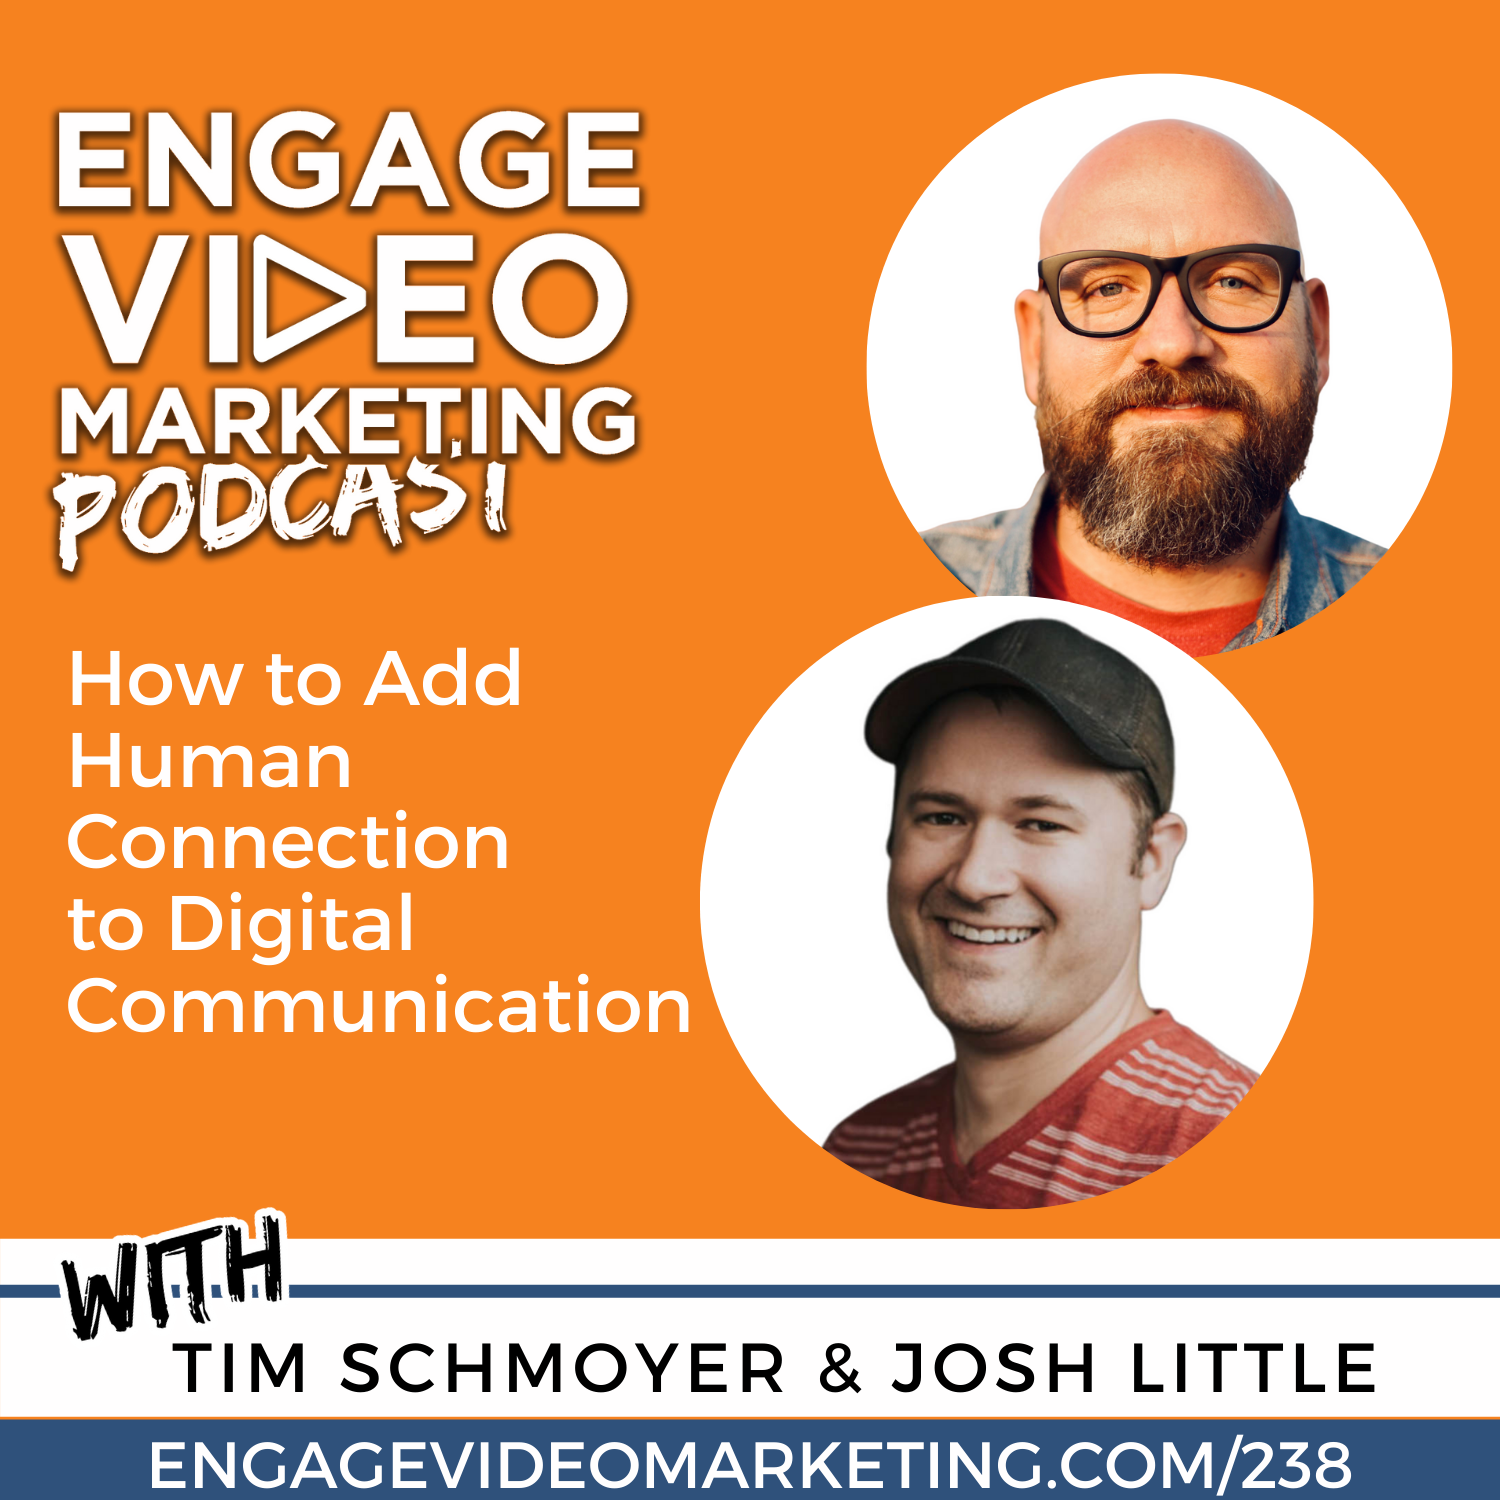 How to Add Human Connection to Digital Communication with Tim Schmoyer and Josh Little